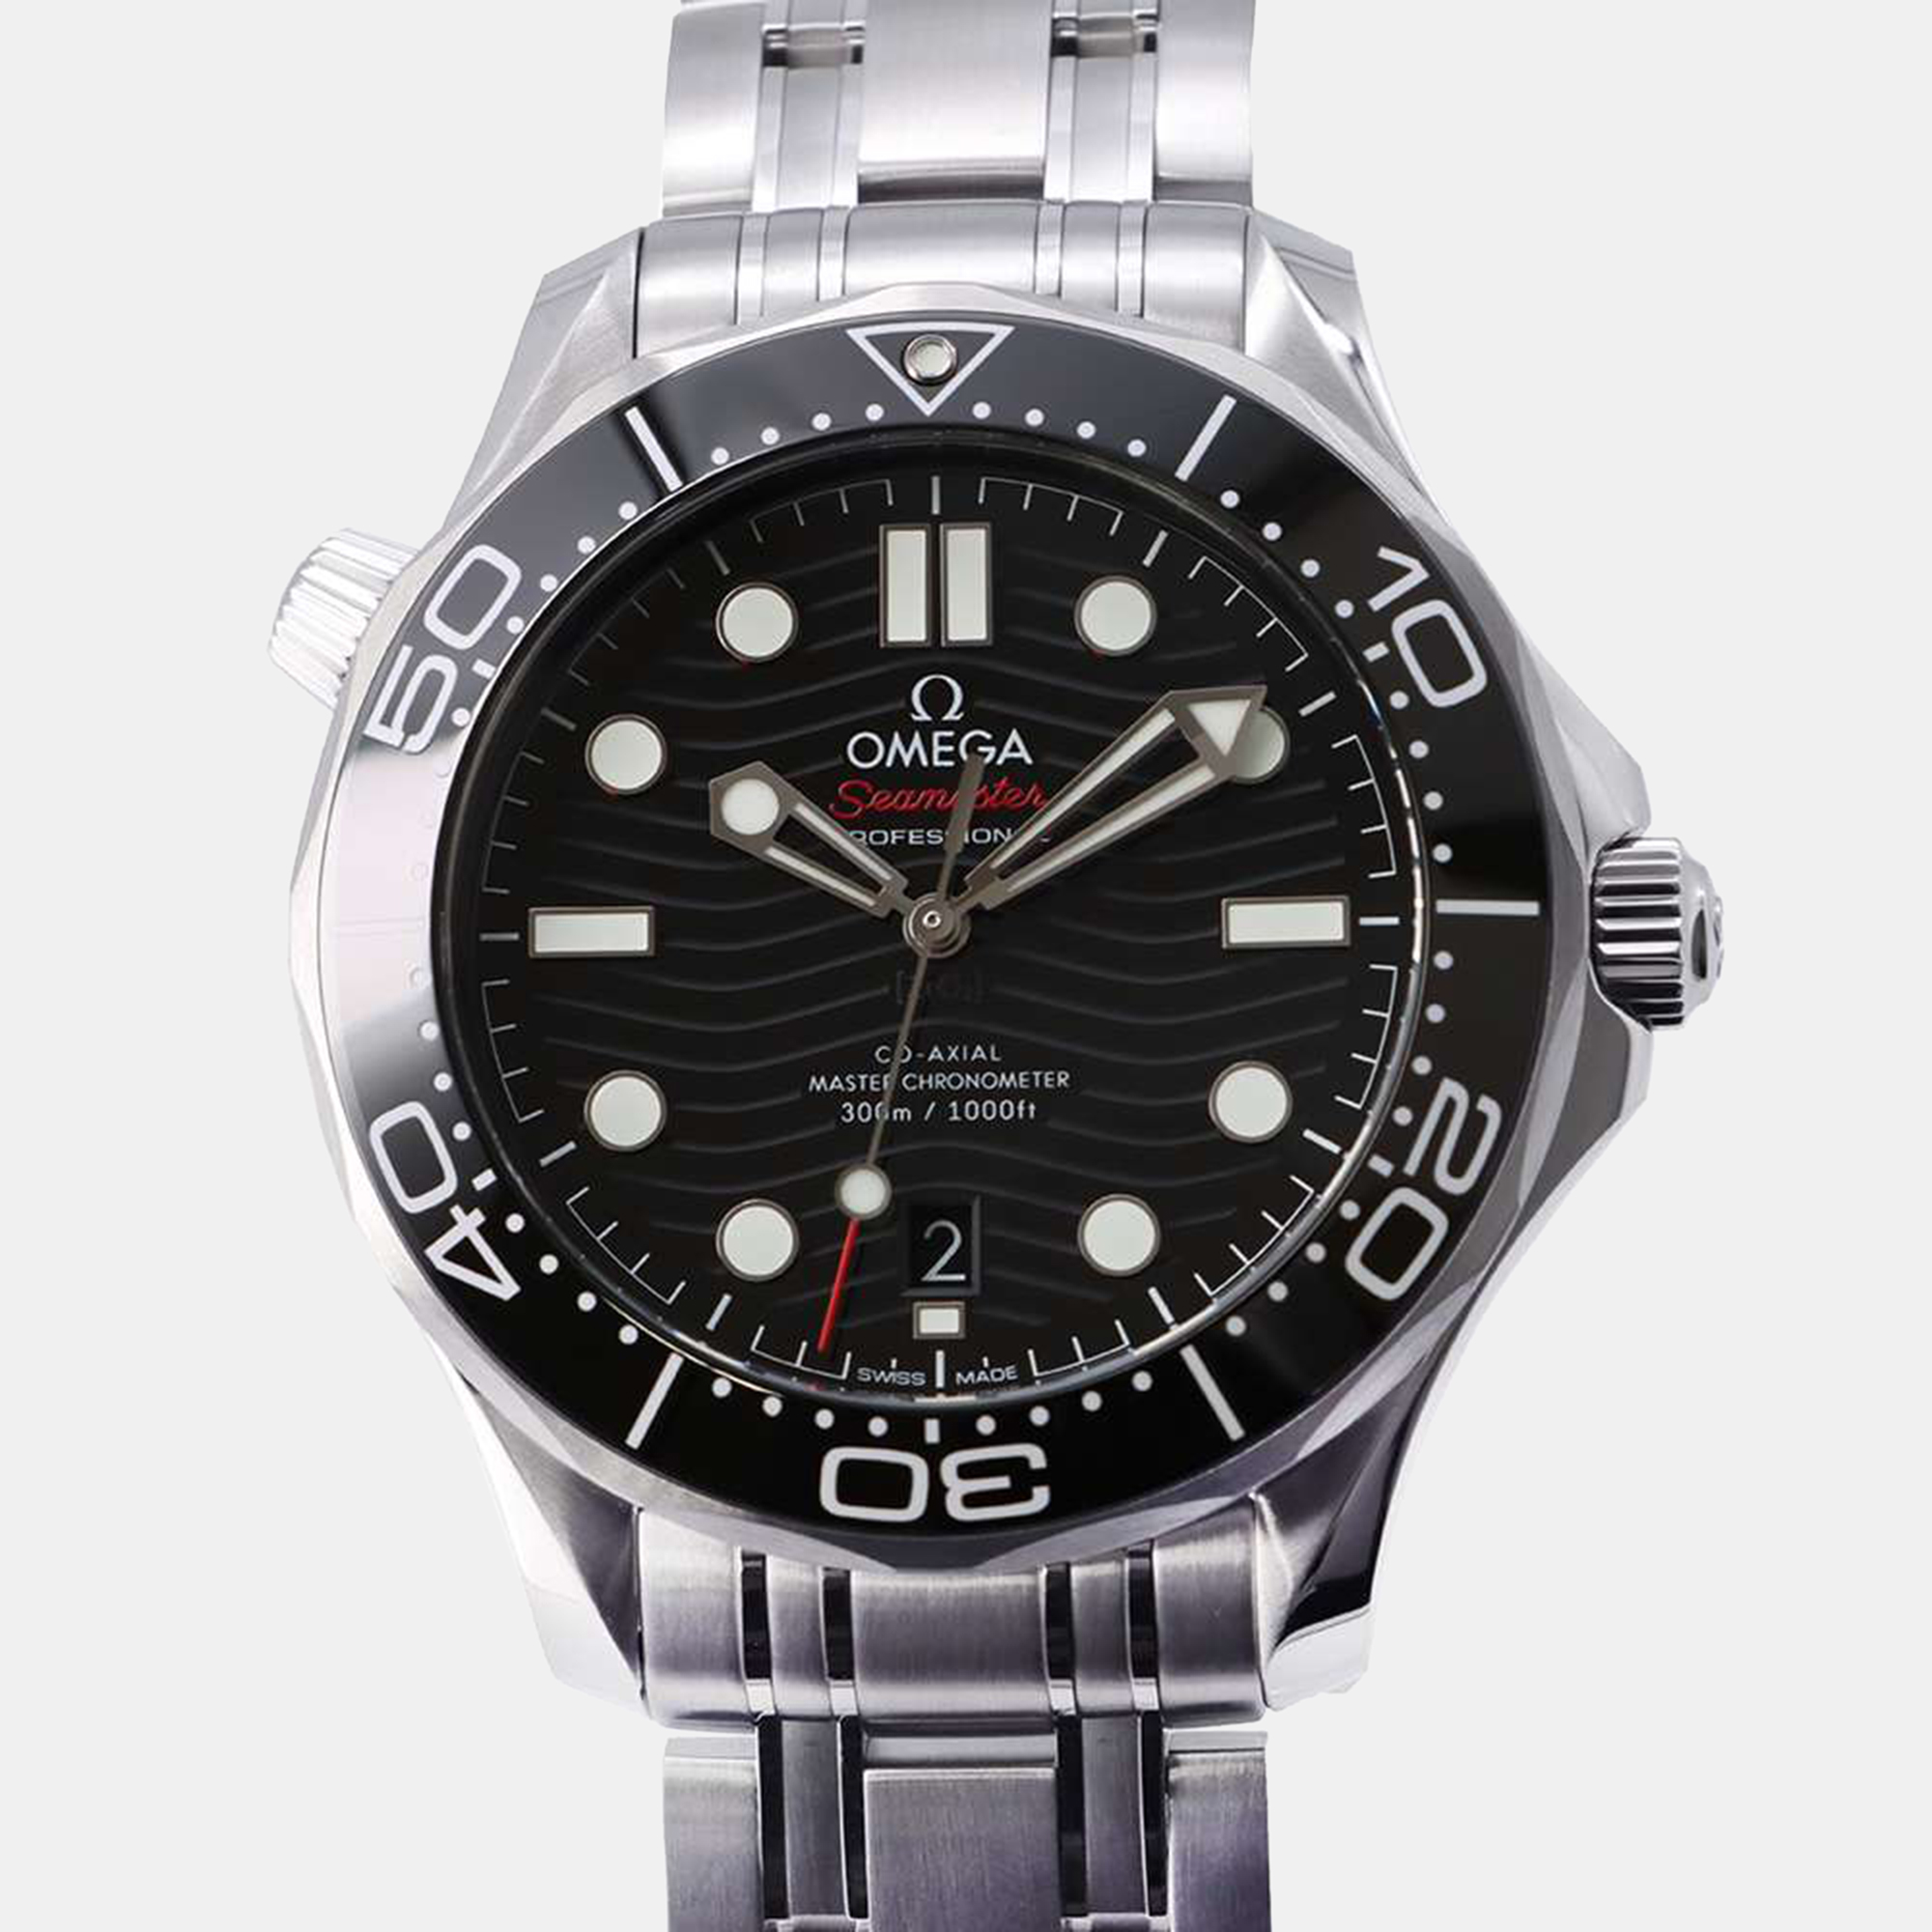 Omega black stainless steel seamaster 210.30.42.20.01.001 automatic men's wristwatch 42 mm